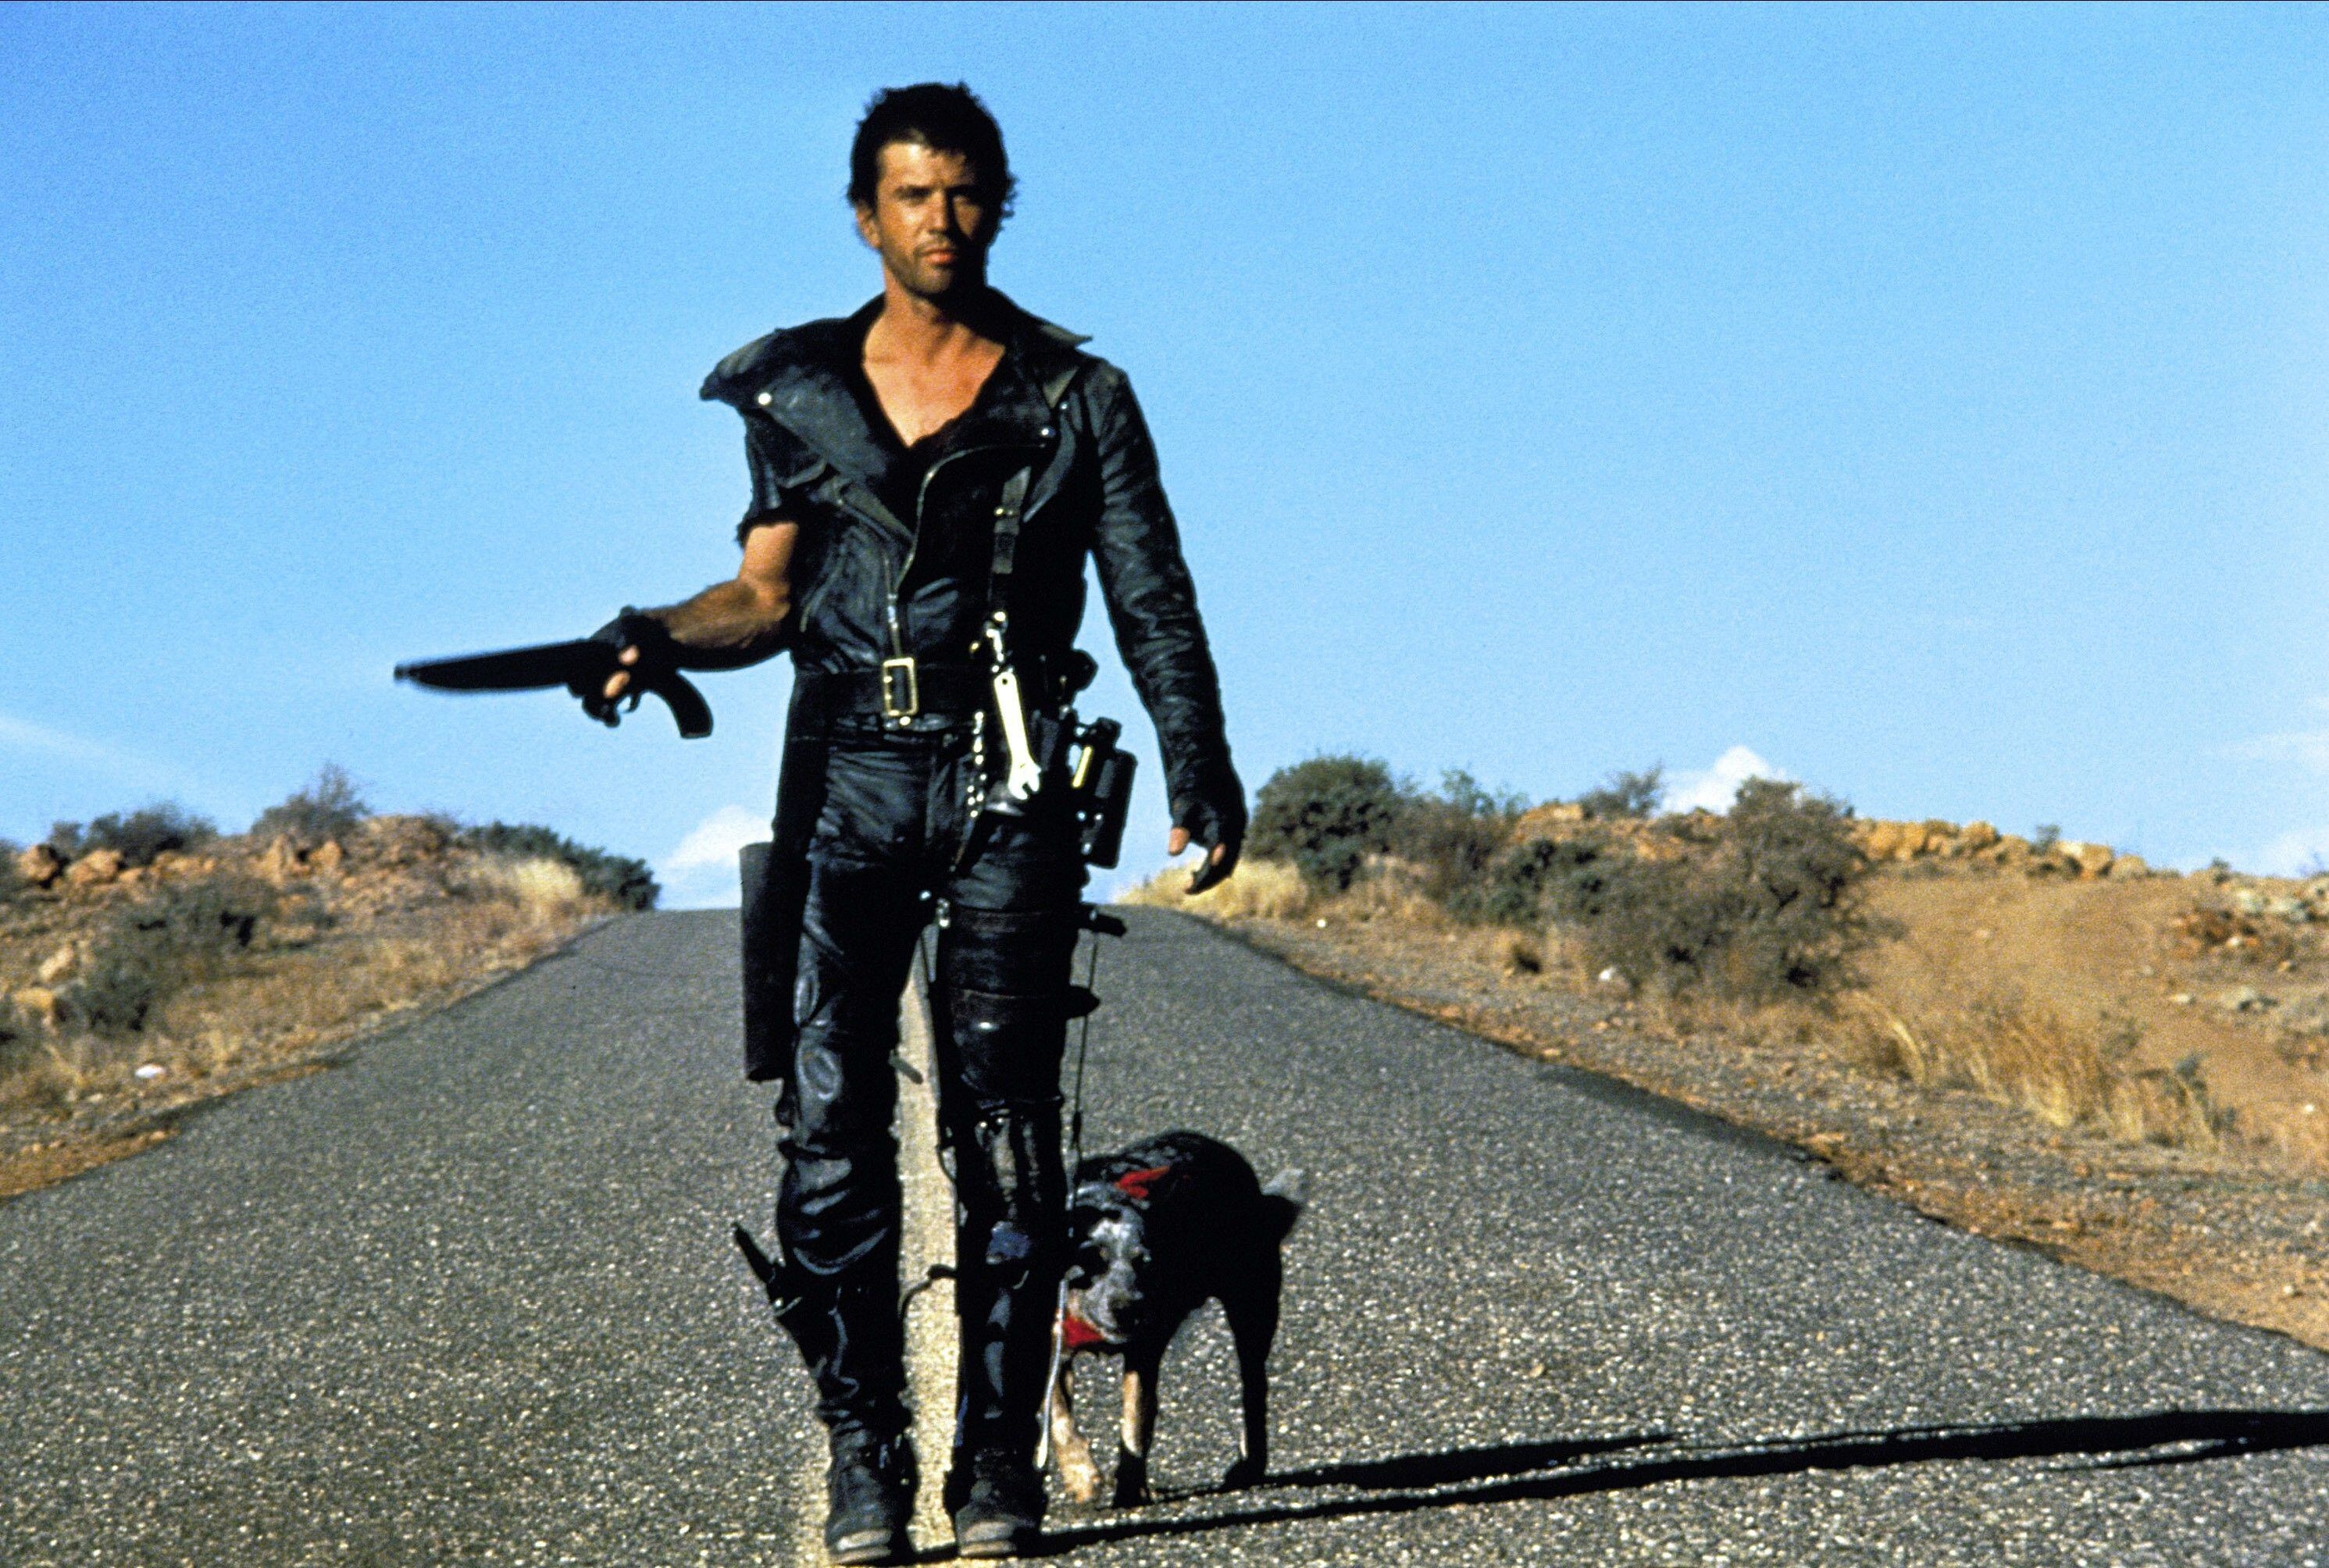 A young Mel Gibson in a modified police officer outfit wanders down an empty road with a dog in tow